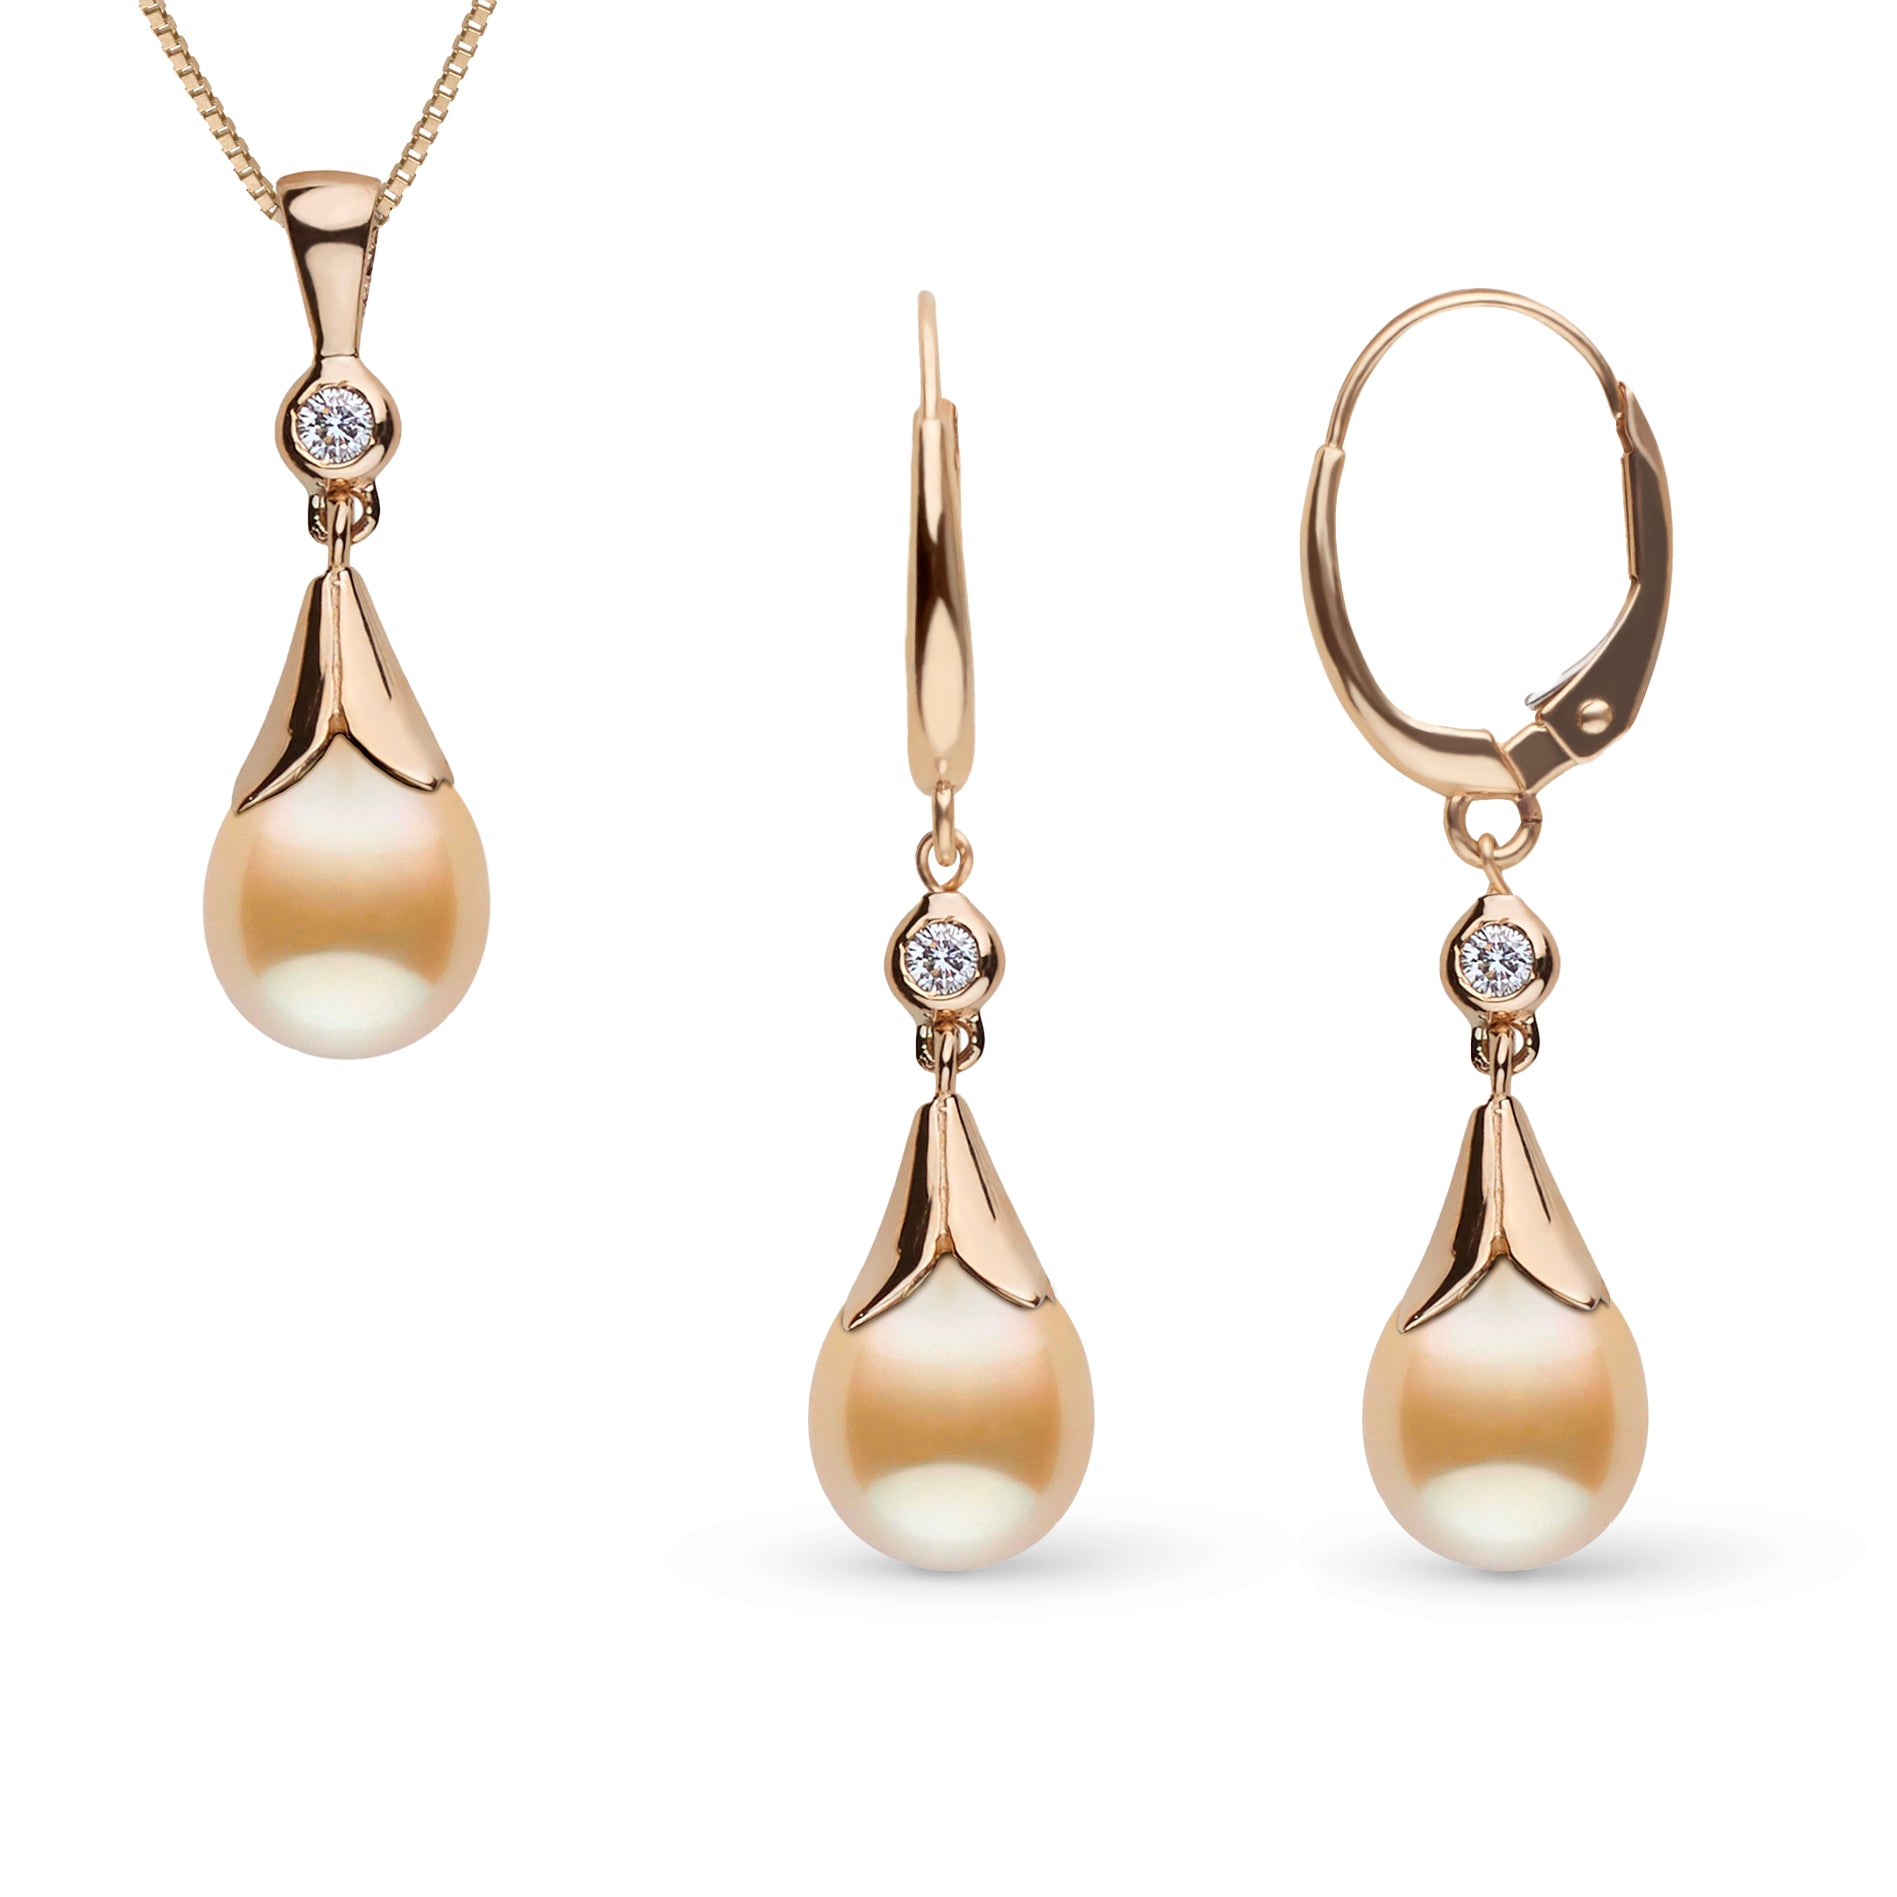 Lilium Collection 9.0-10.0 mm Golden South Sea Drop Pearl and Diamond Pendant and Earrings Set